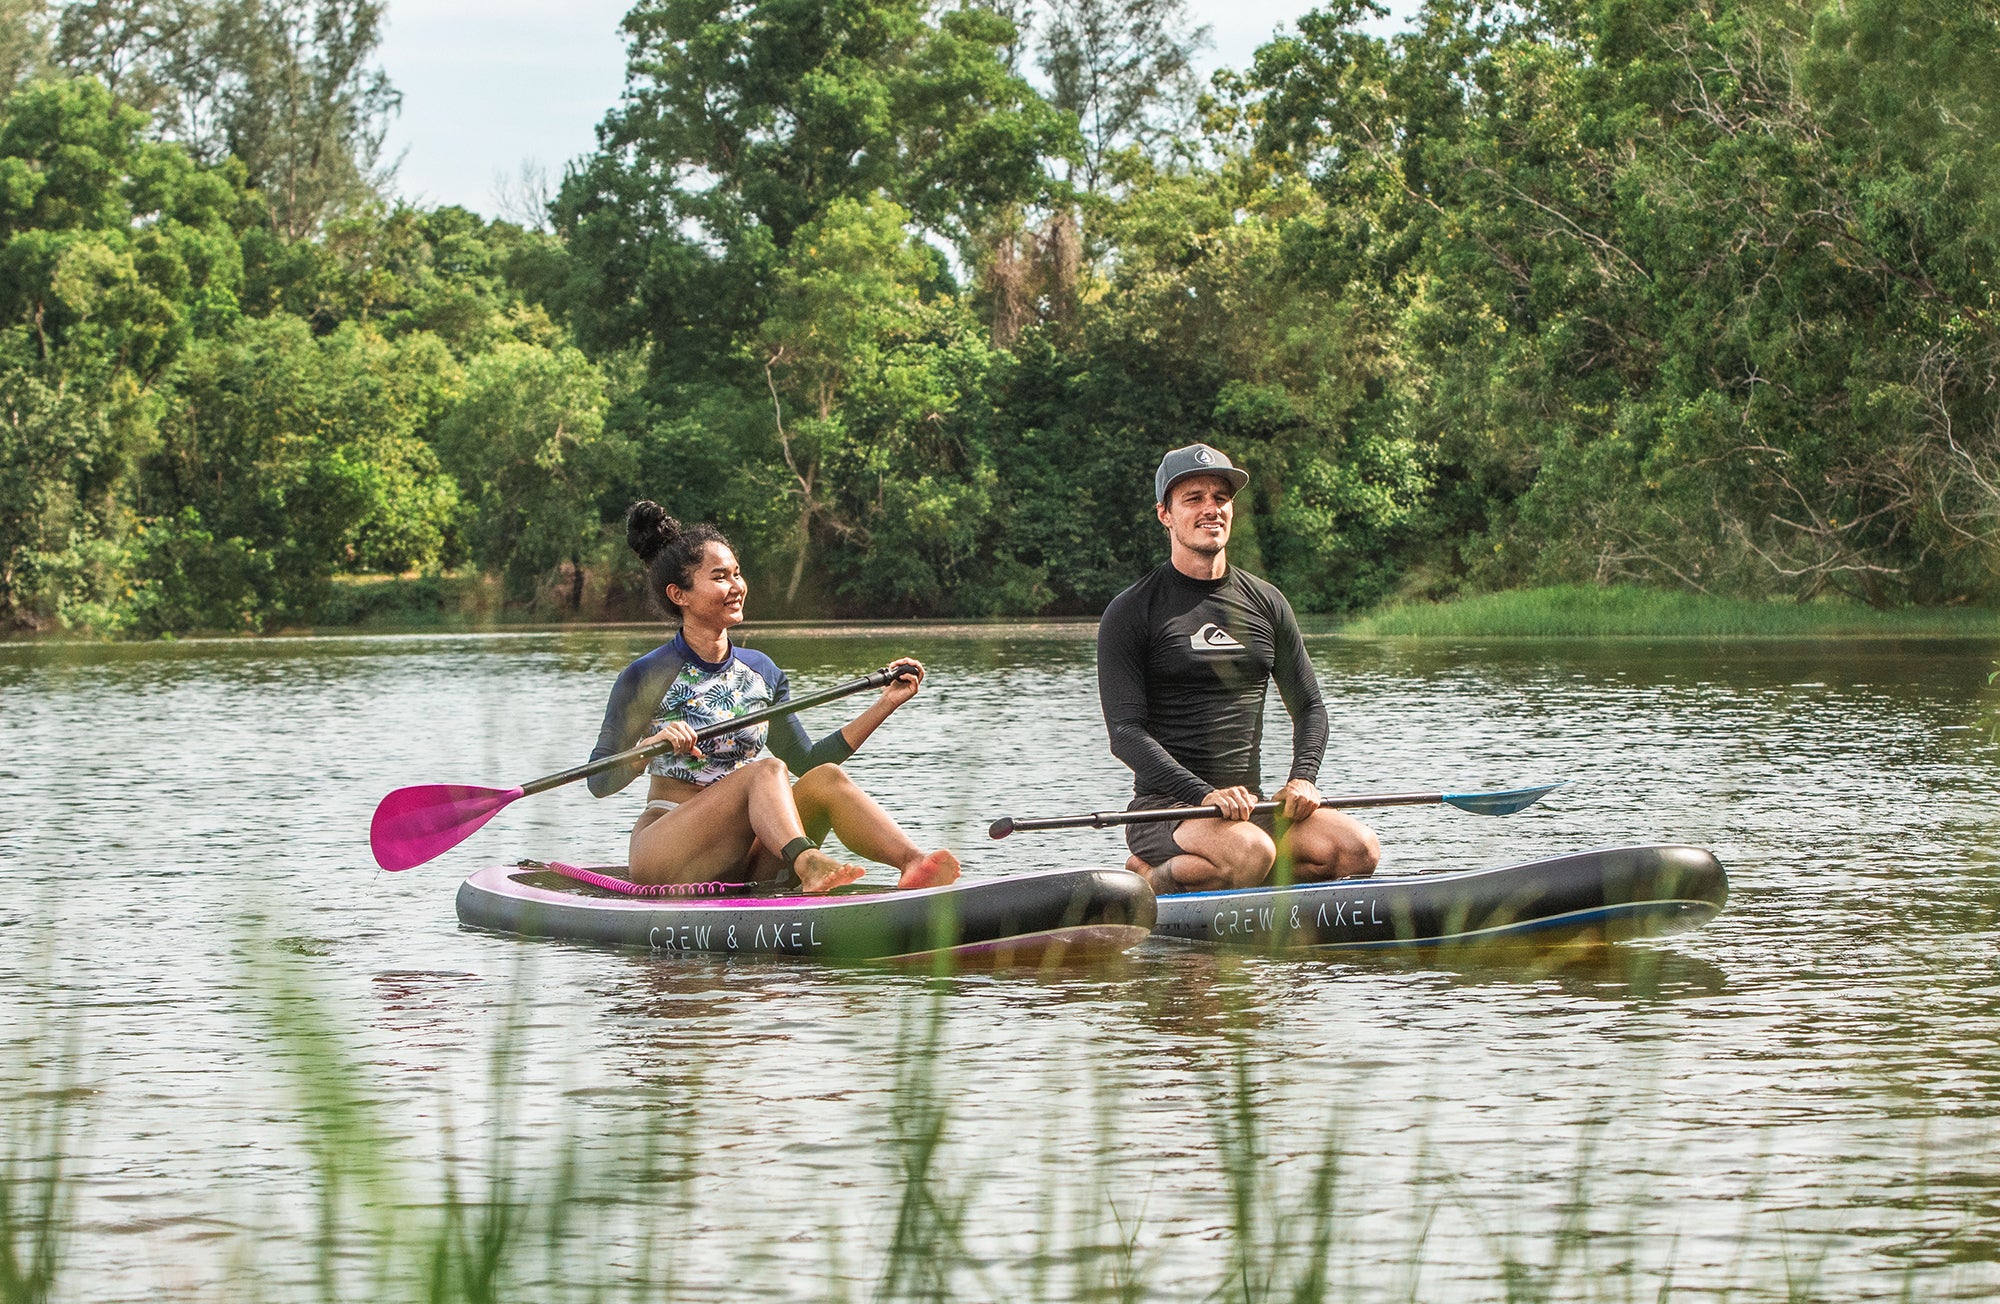 6 tips to know before your first paddle boarding experience